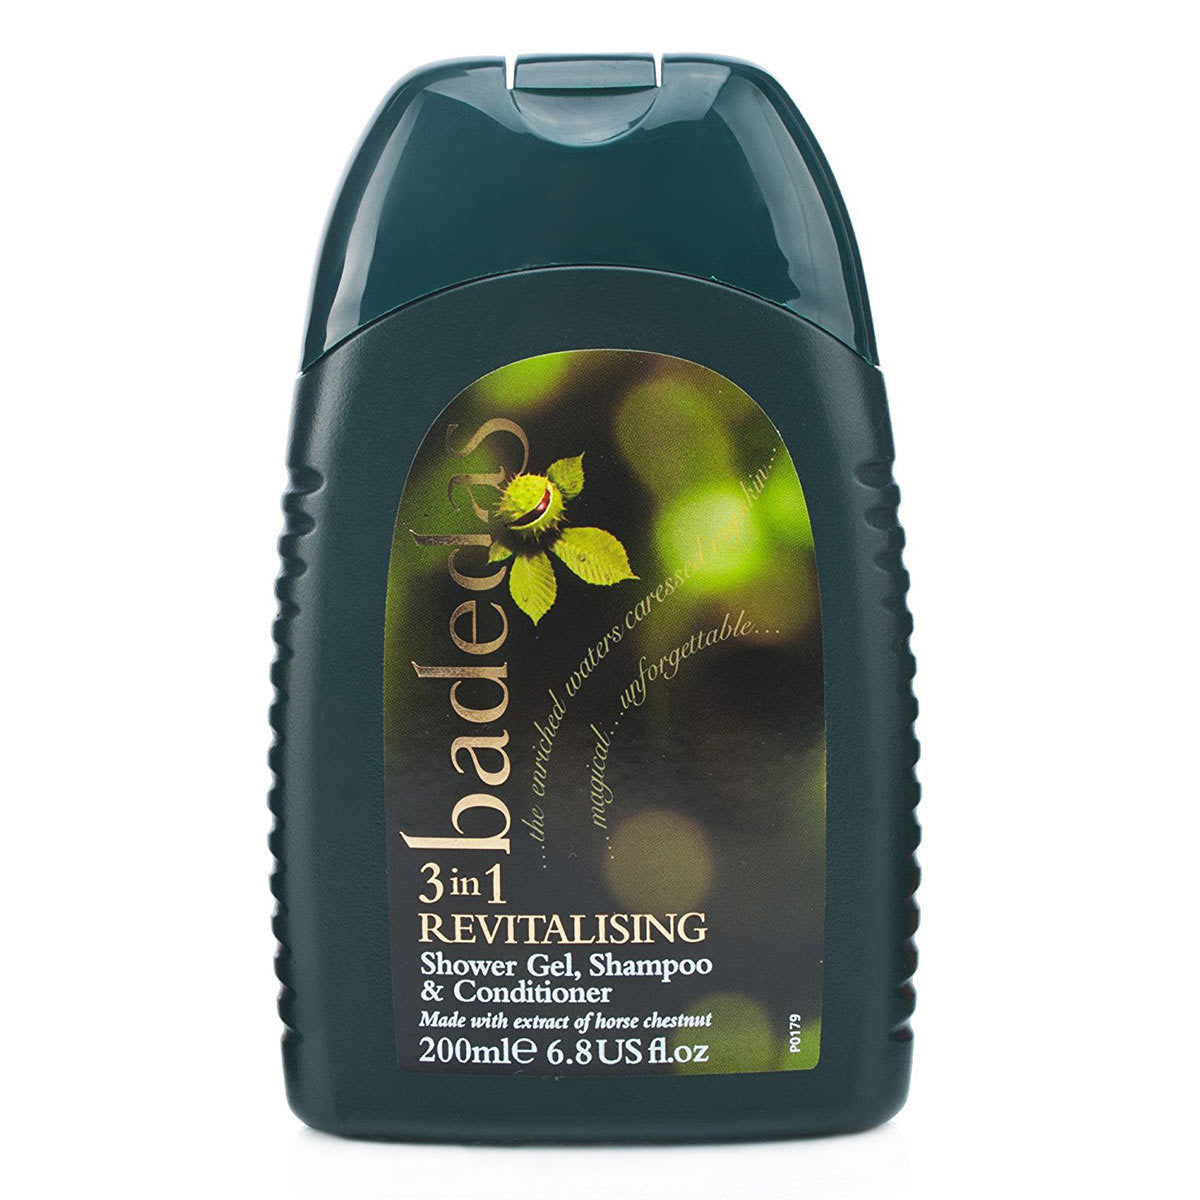 Primary image of Badedas 3-in-1 Revitalizing Shower Gel, Shampoo, and Conditioner